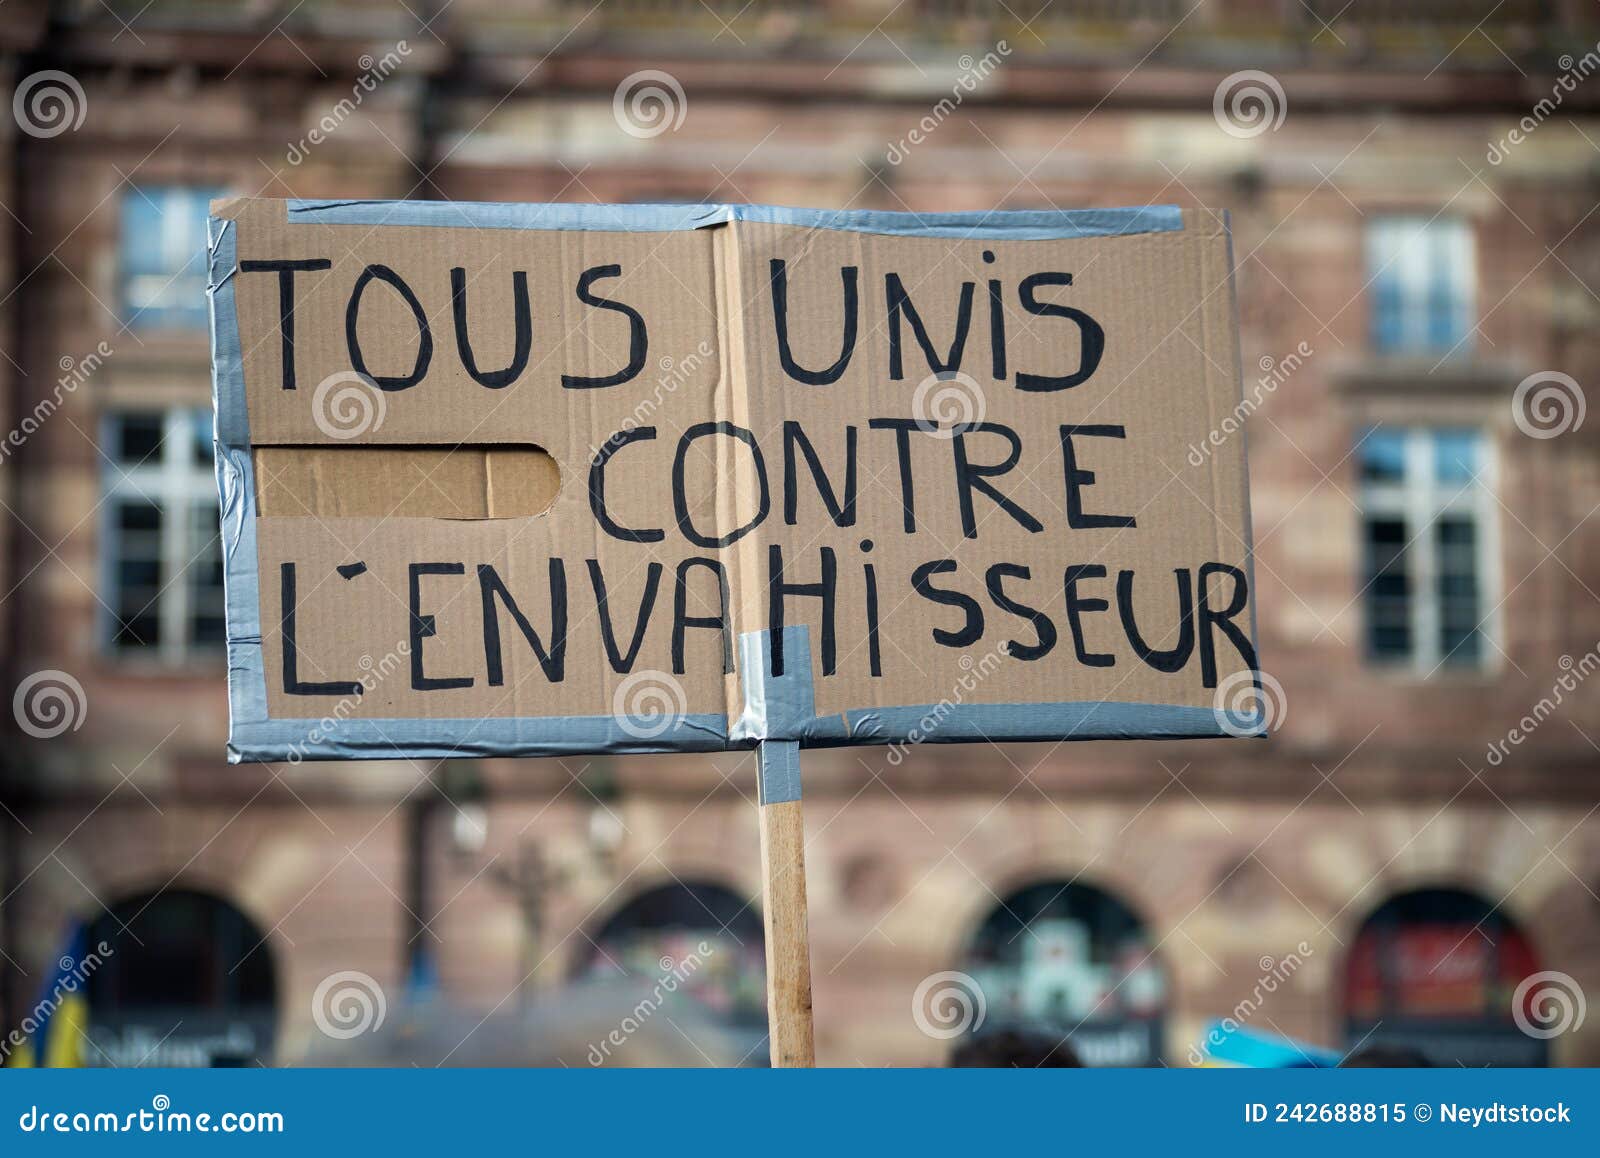 people protesting against the war with text in french : tous unis contre l`envahisseur, in english : all united against the